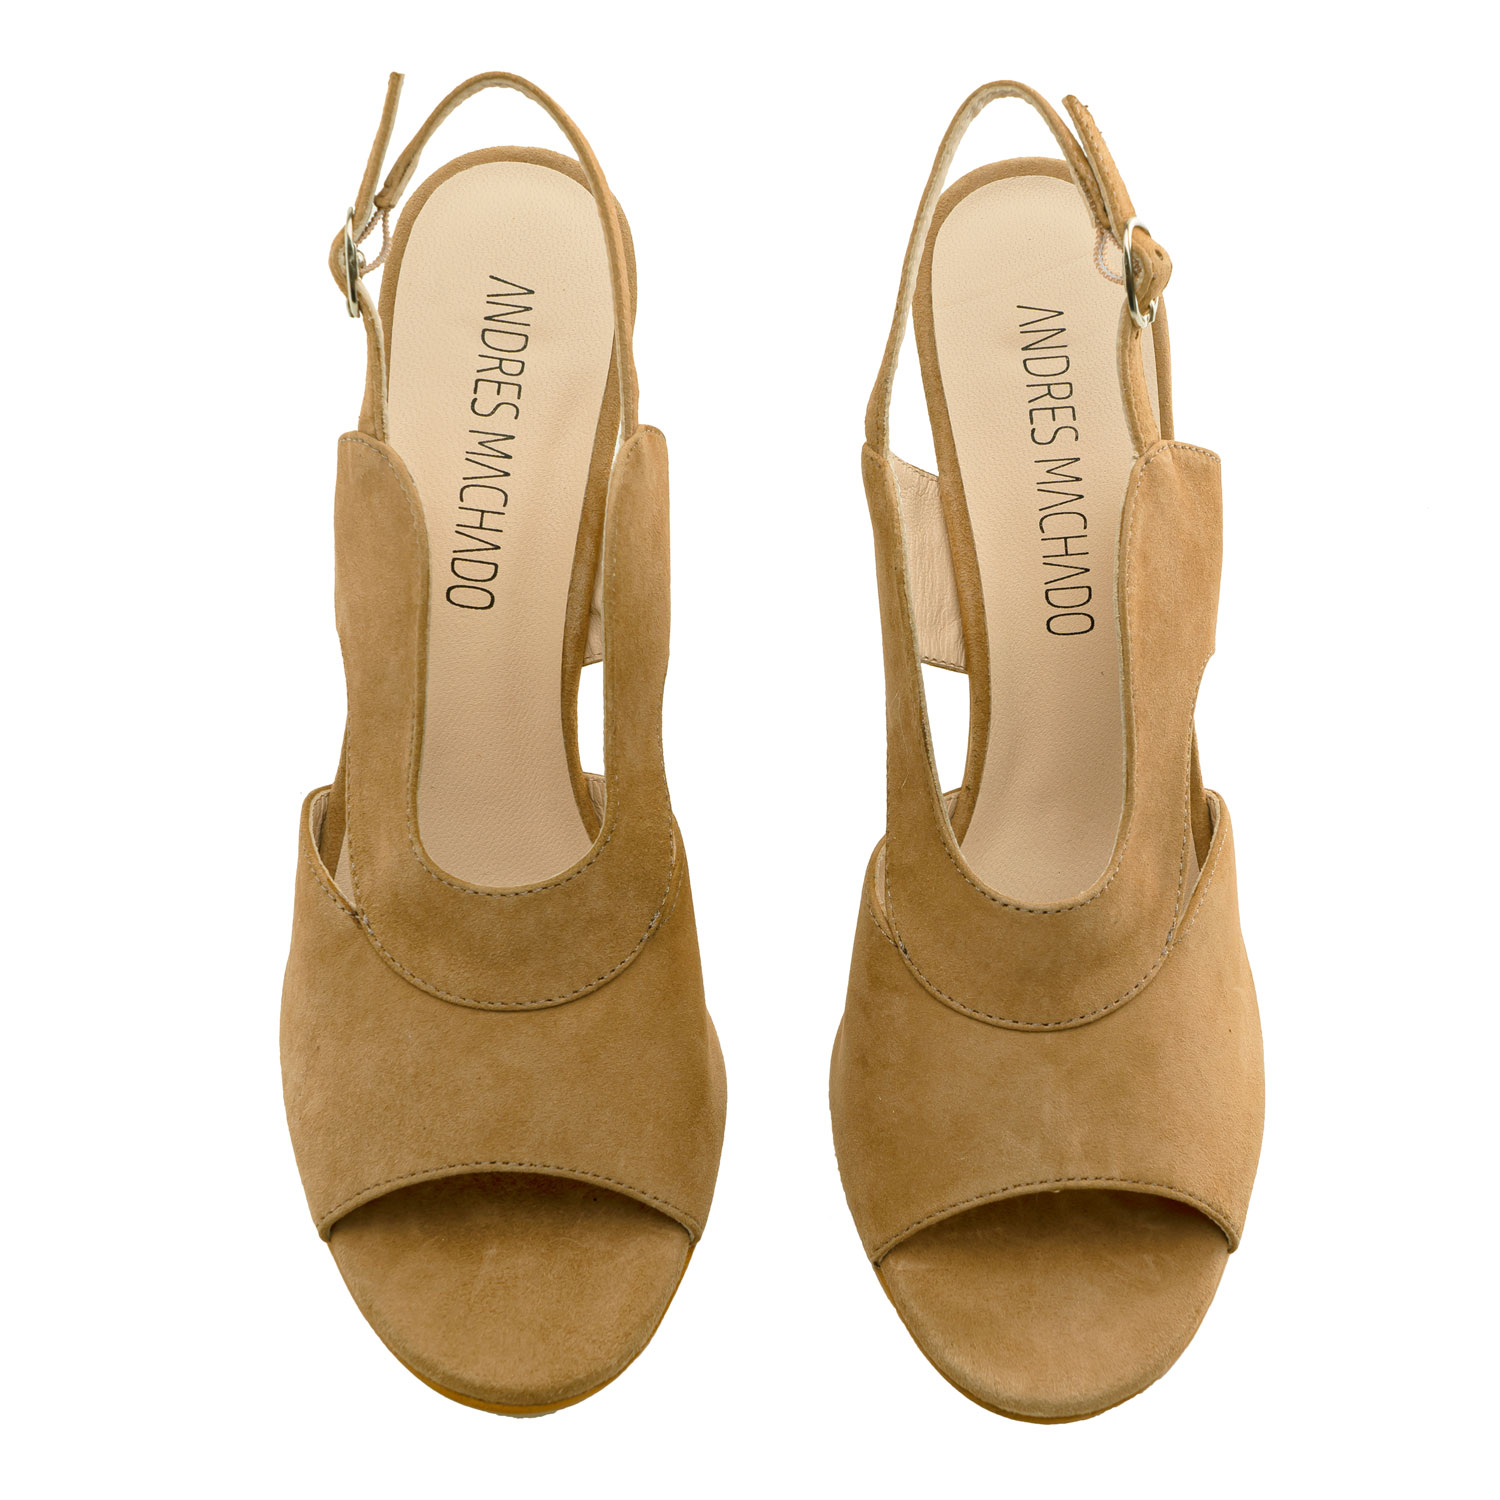 Slingback Sandals in Camel Suede Leather 